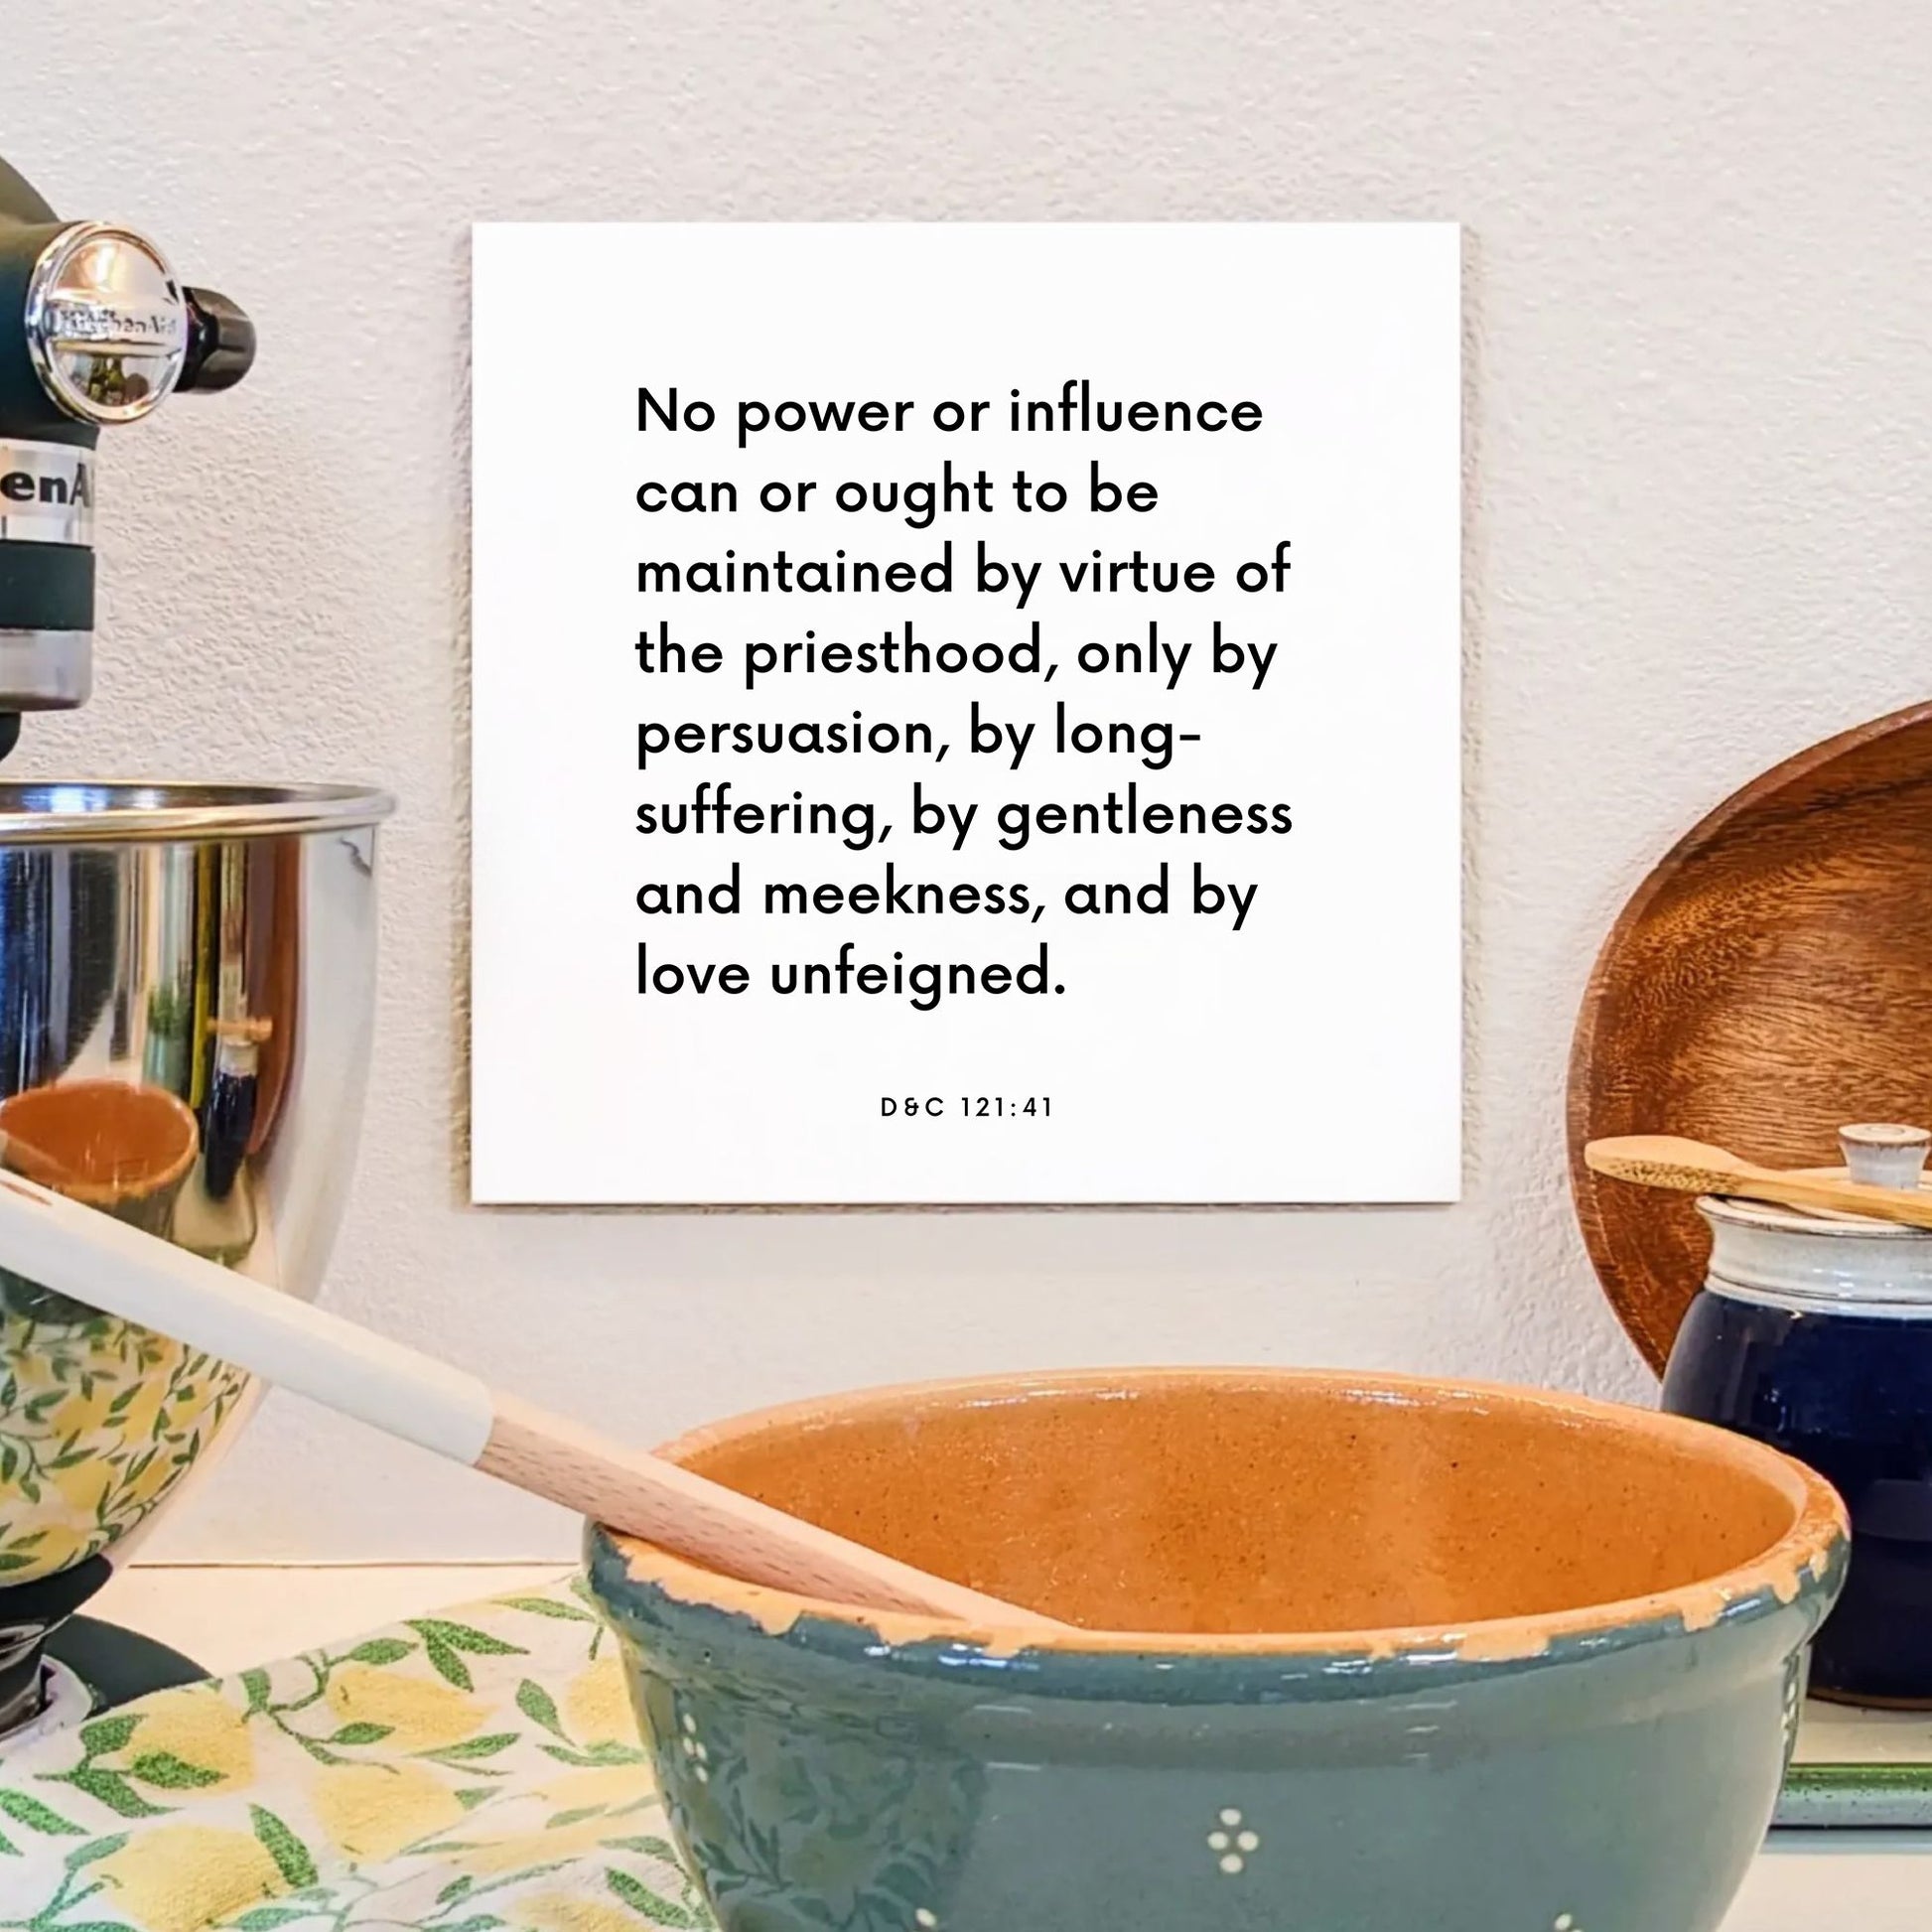 Kitchen mouting of the scripture tile for D&C 121:41 - "No power or influence can or ought to be maintained"